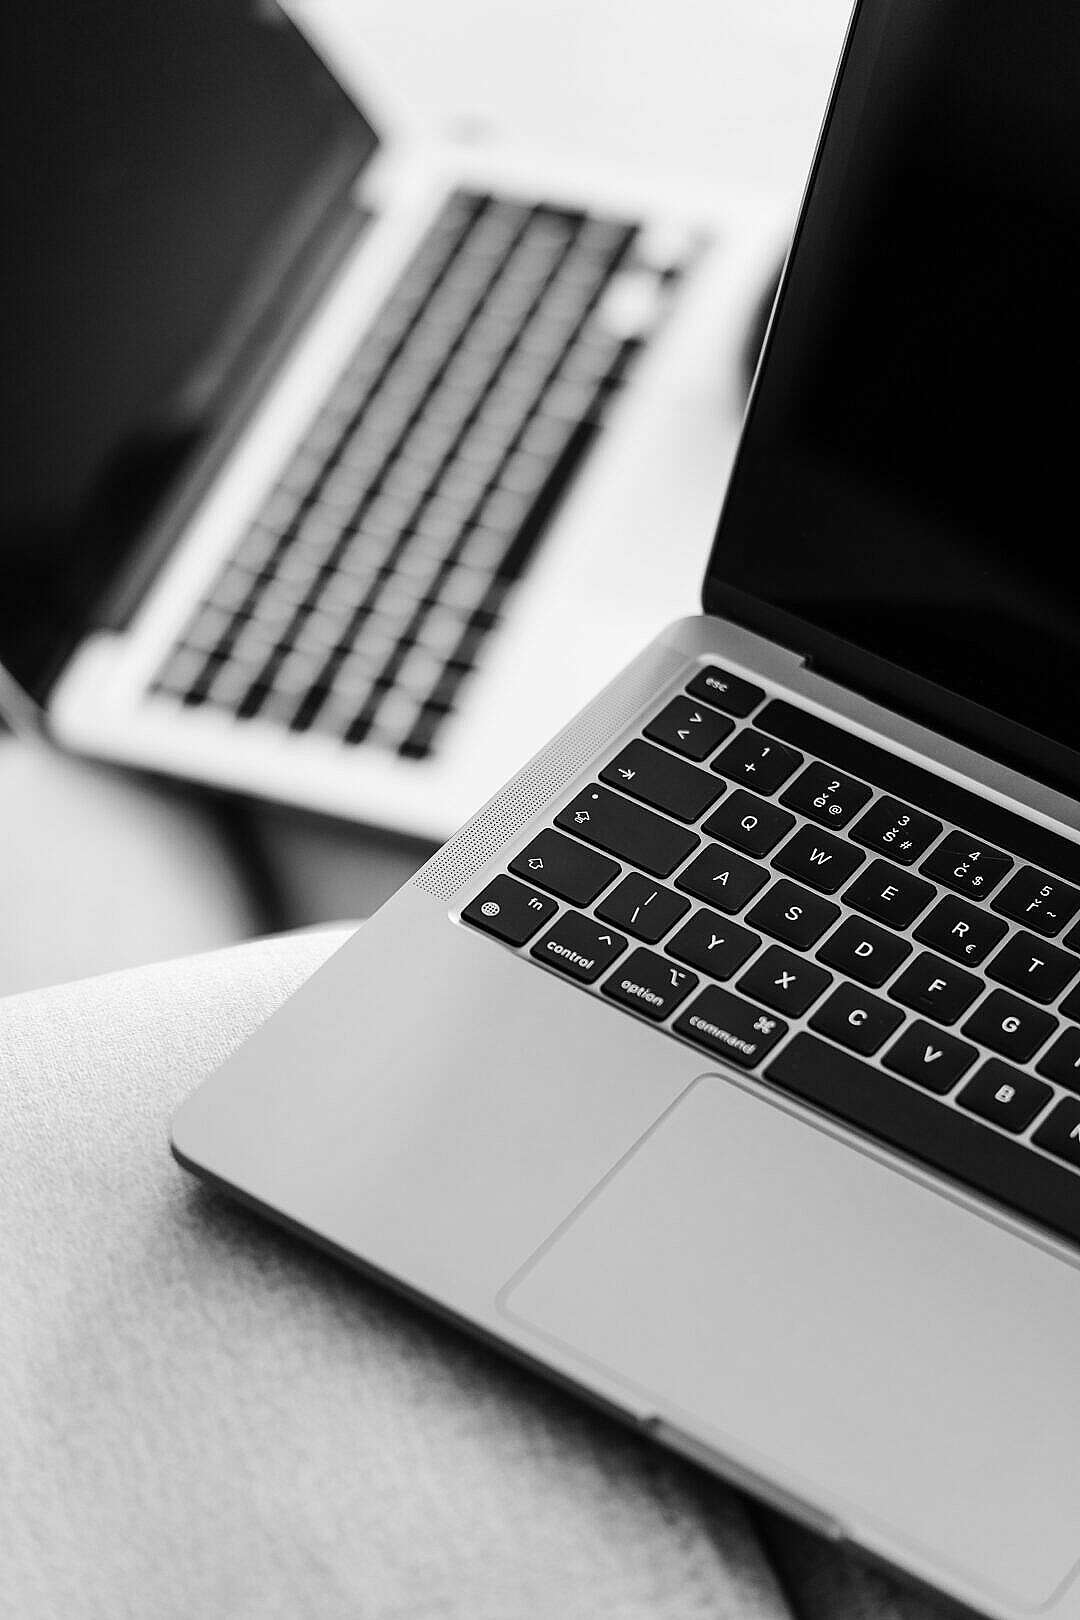 Download Two MacBook Pro Laptops Black and White FREE Stock Photo